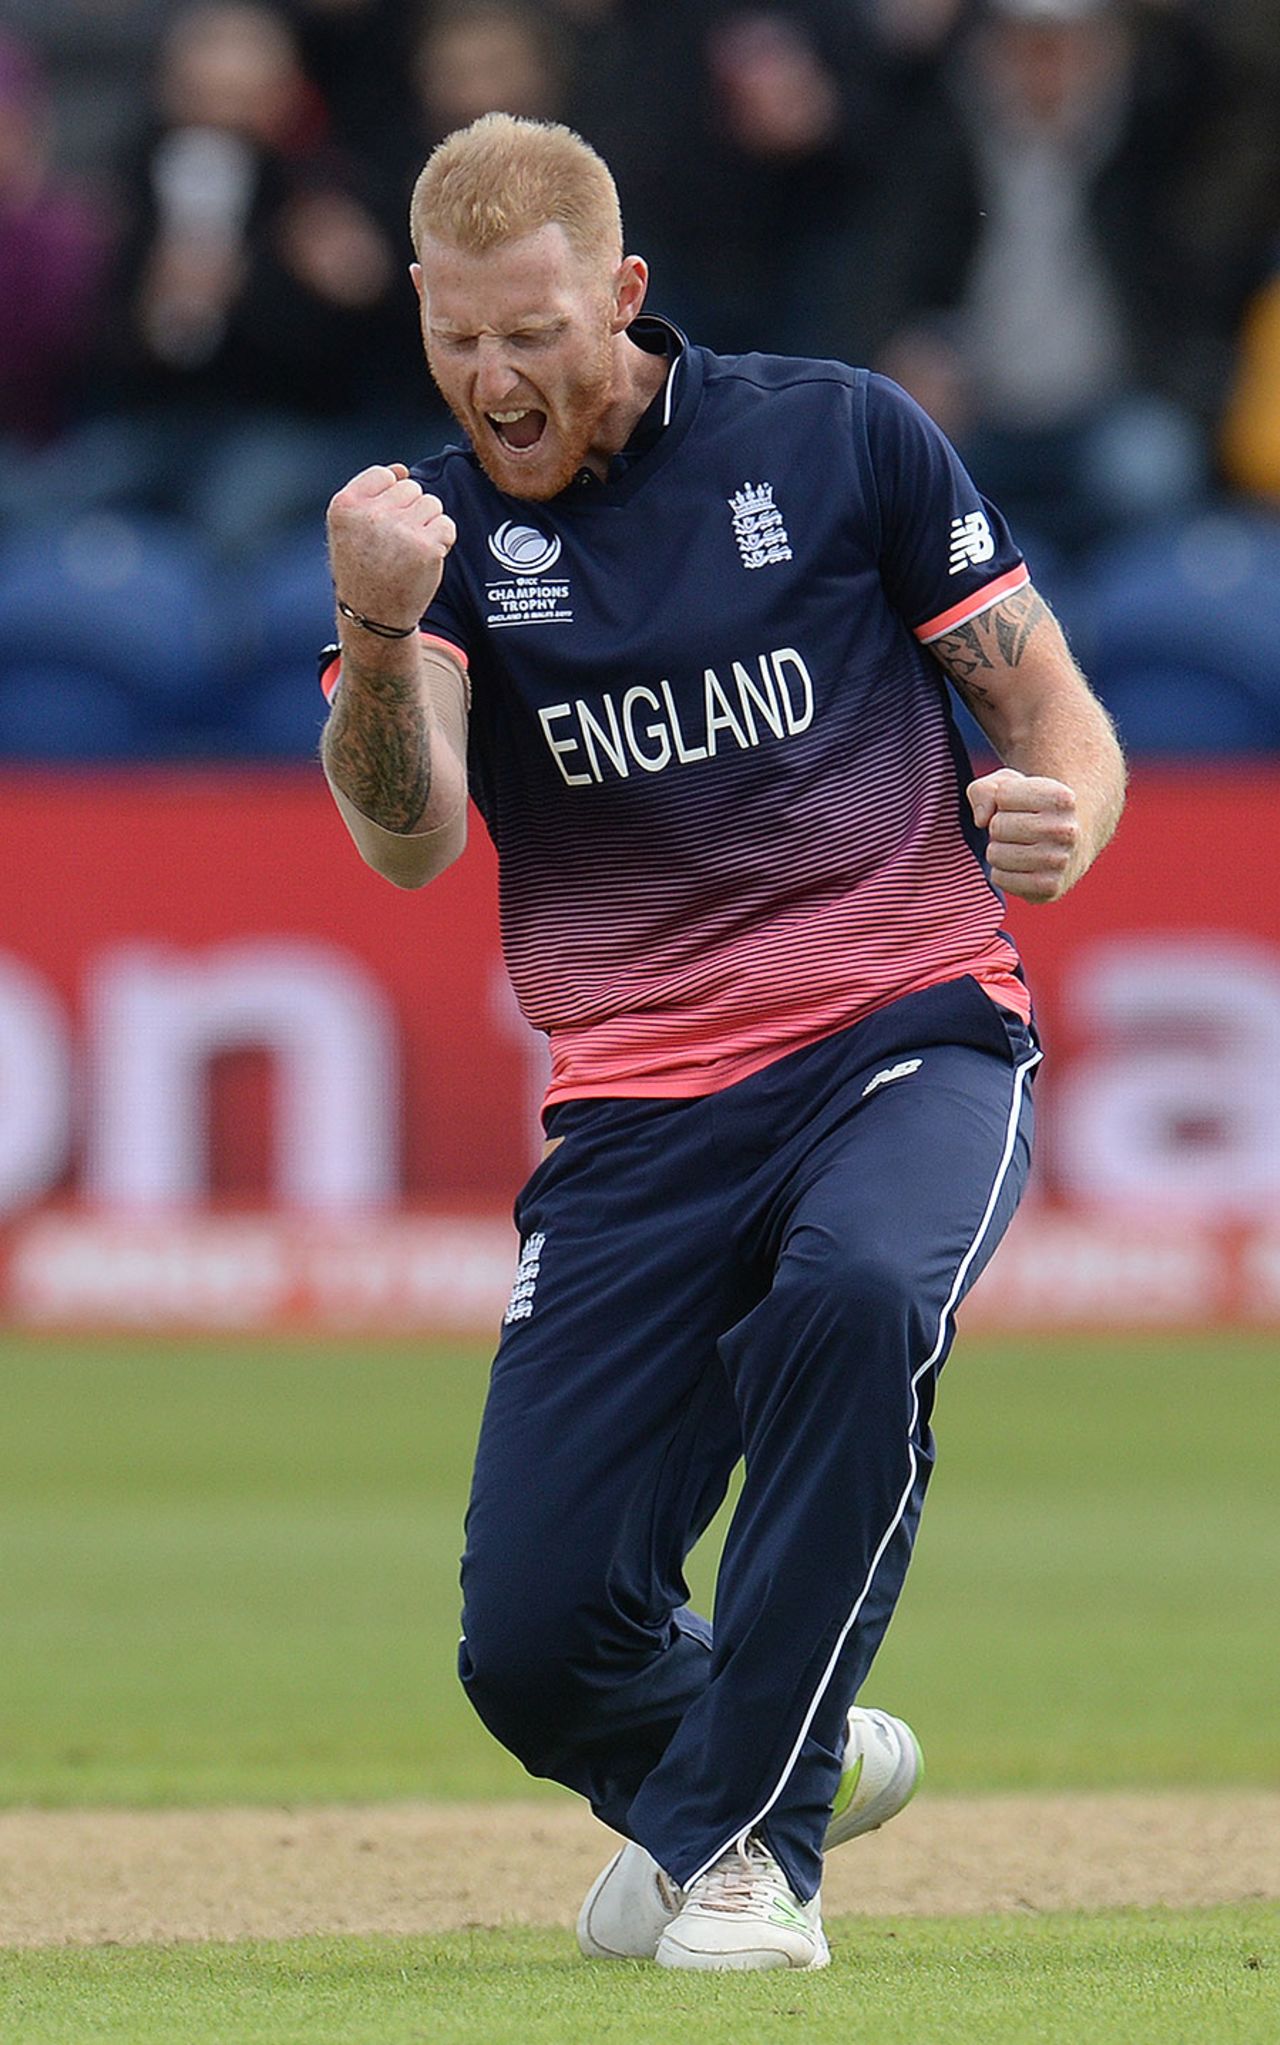 Ben Stokes claimed the vital wicket of Martin Guptill for 27, England v New Zealand, Champions Trophy 2017, Cardiff, June 6, 2017